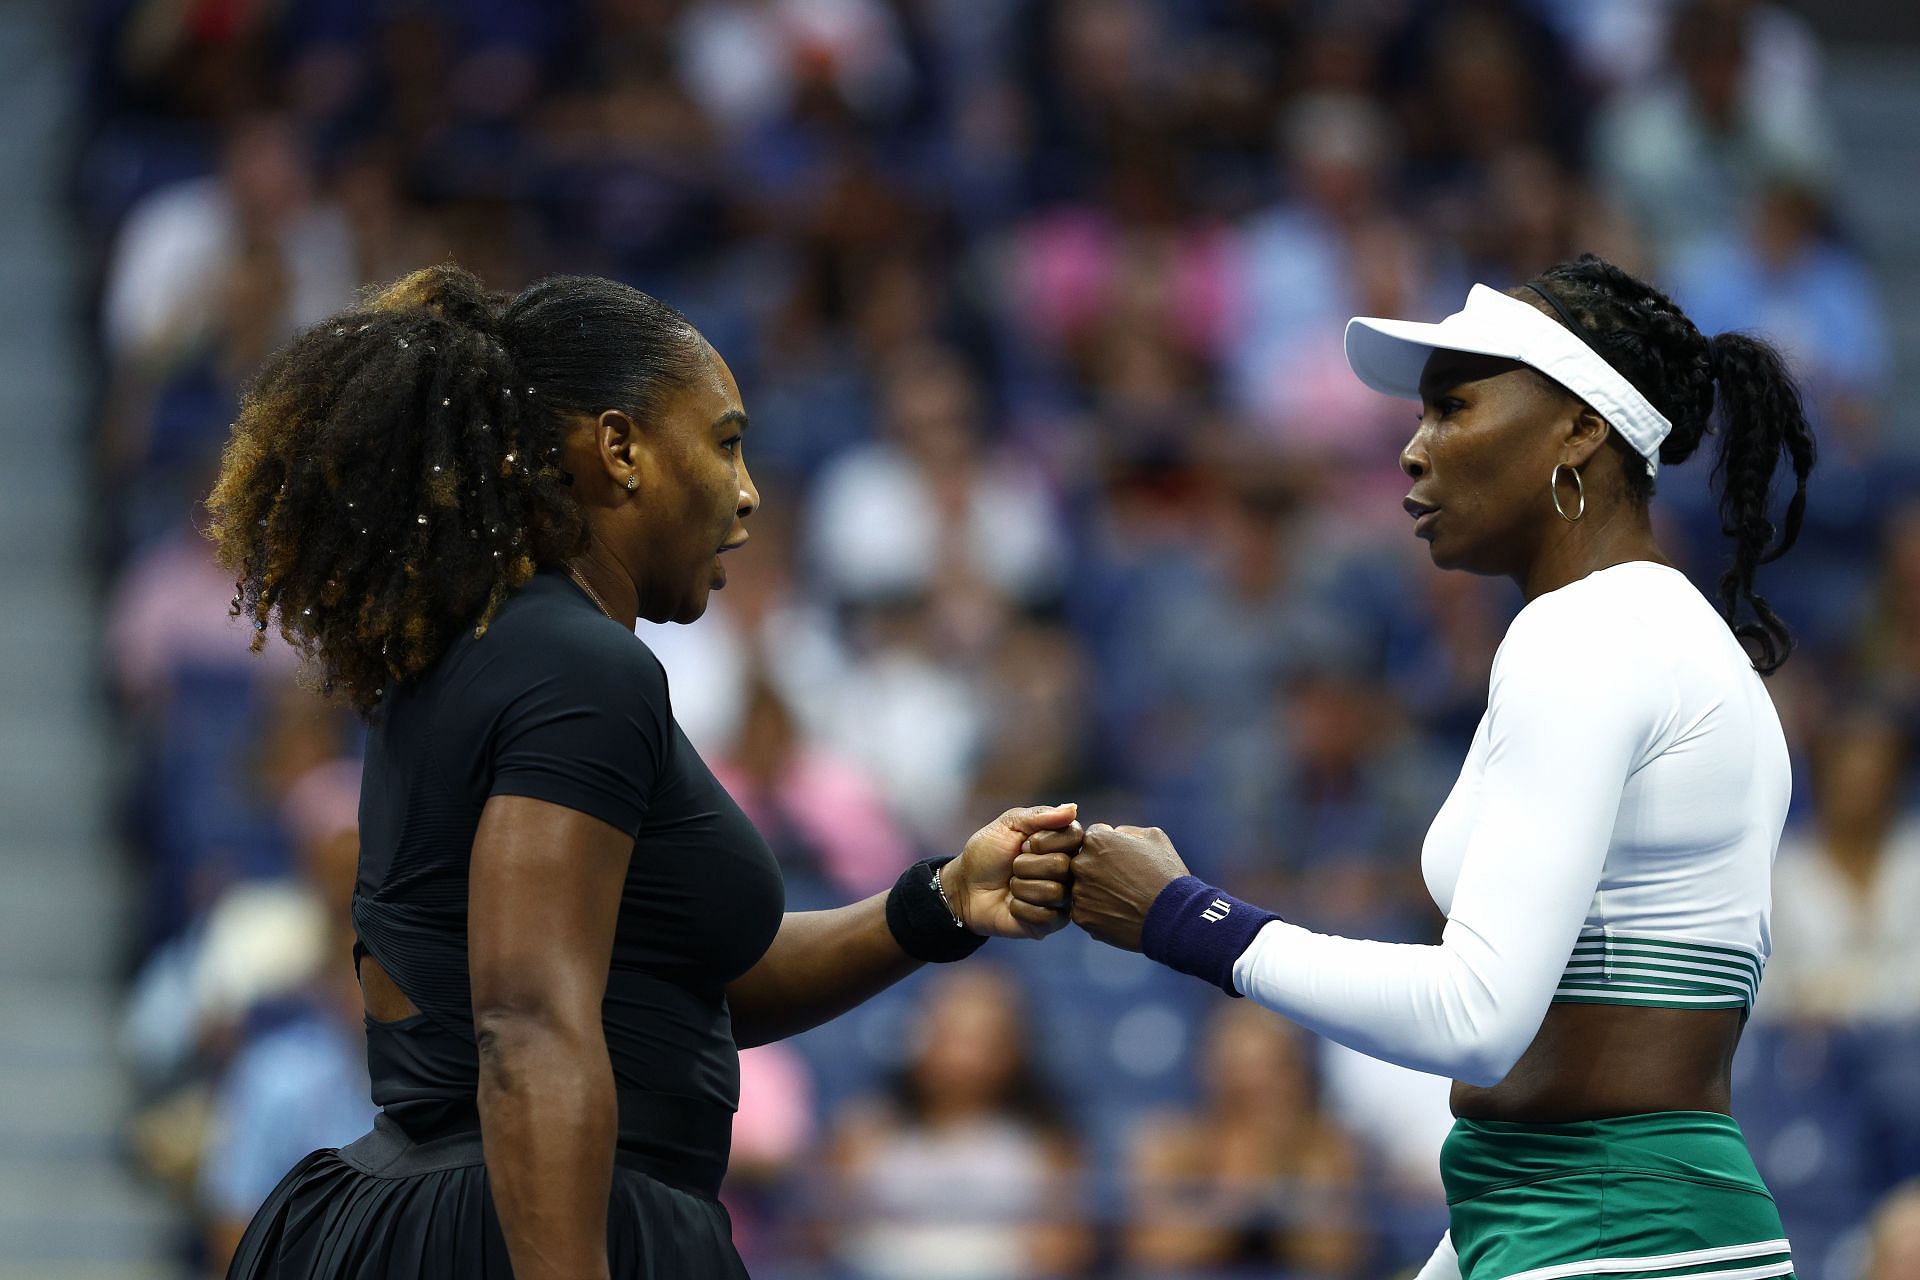 The Williams sisters at the 2022 US Open